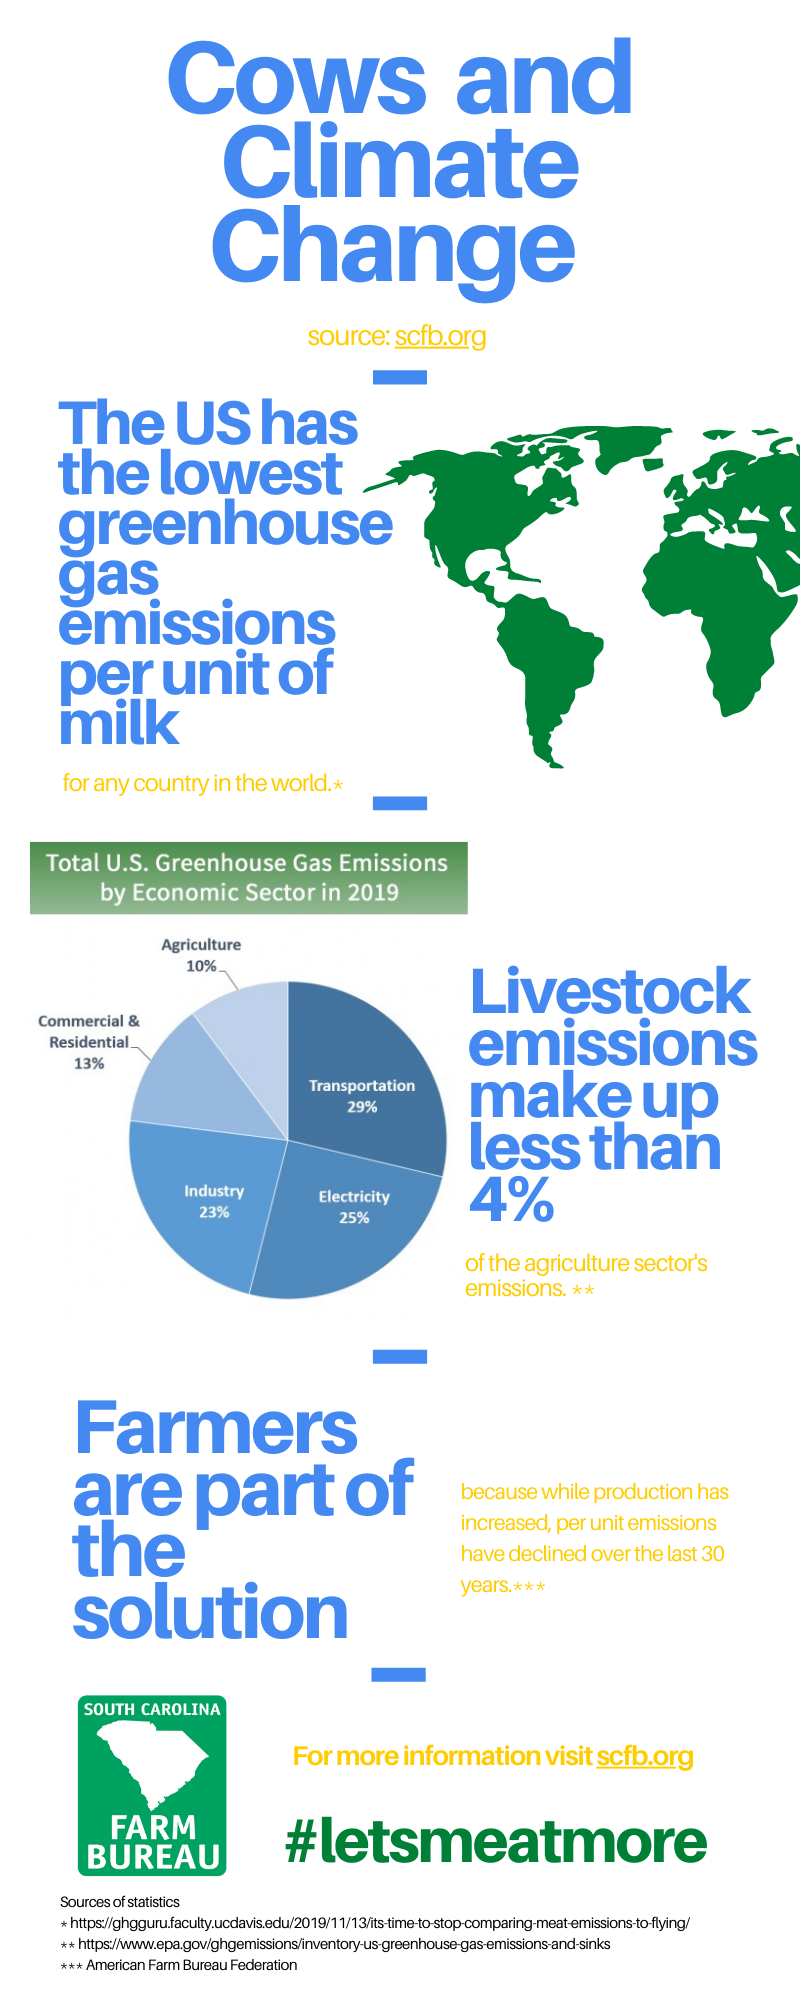 An infographic about the impact of cows on the U.S. greenhouse gas emissions